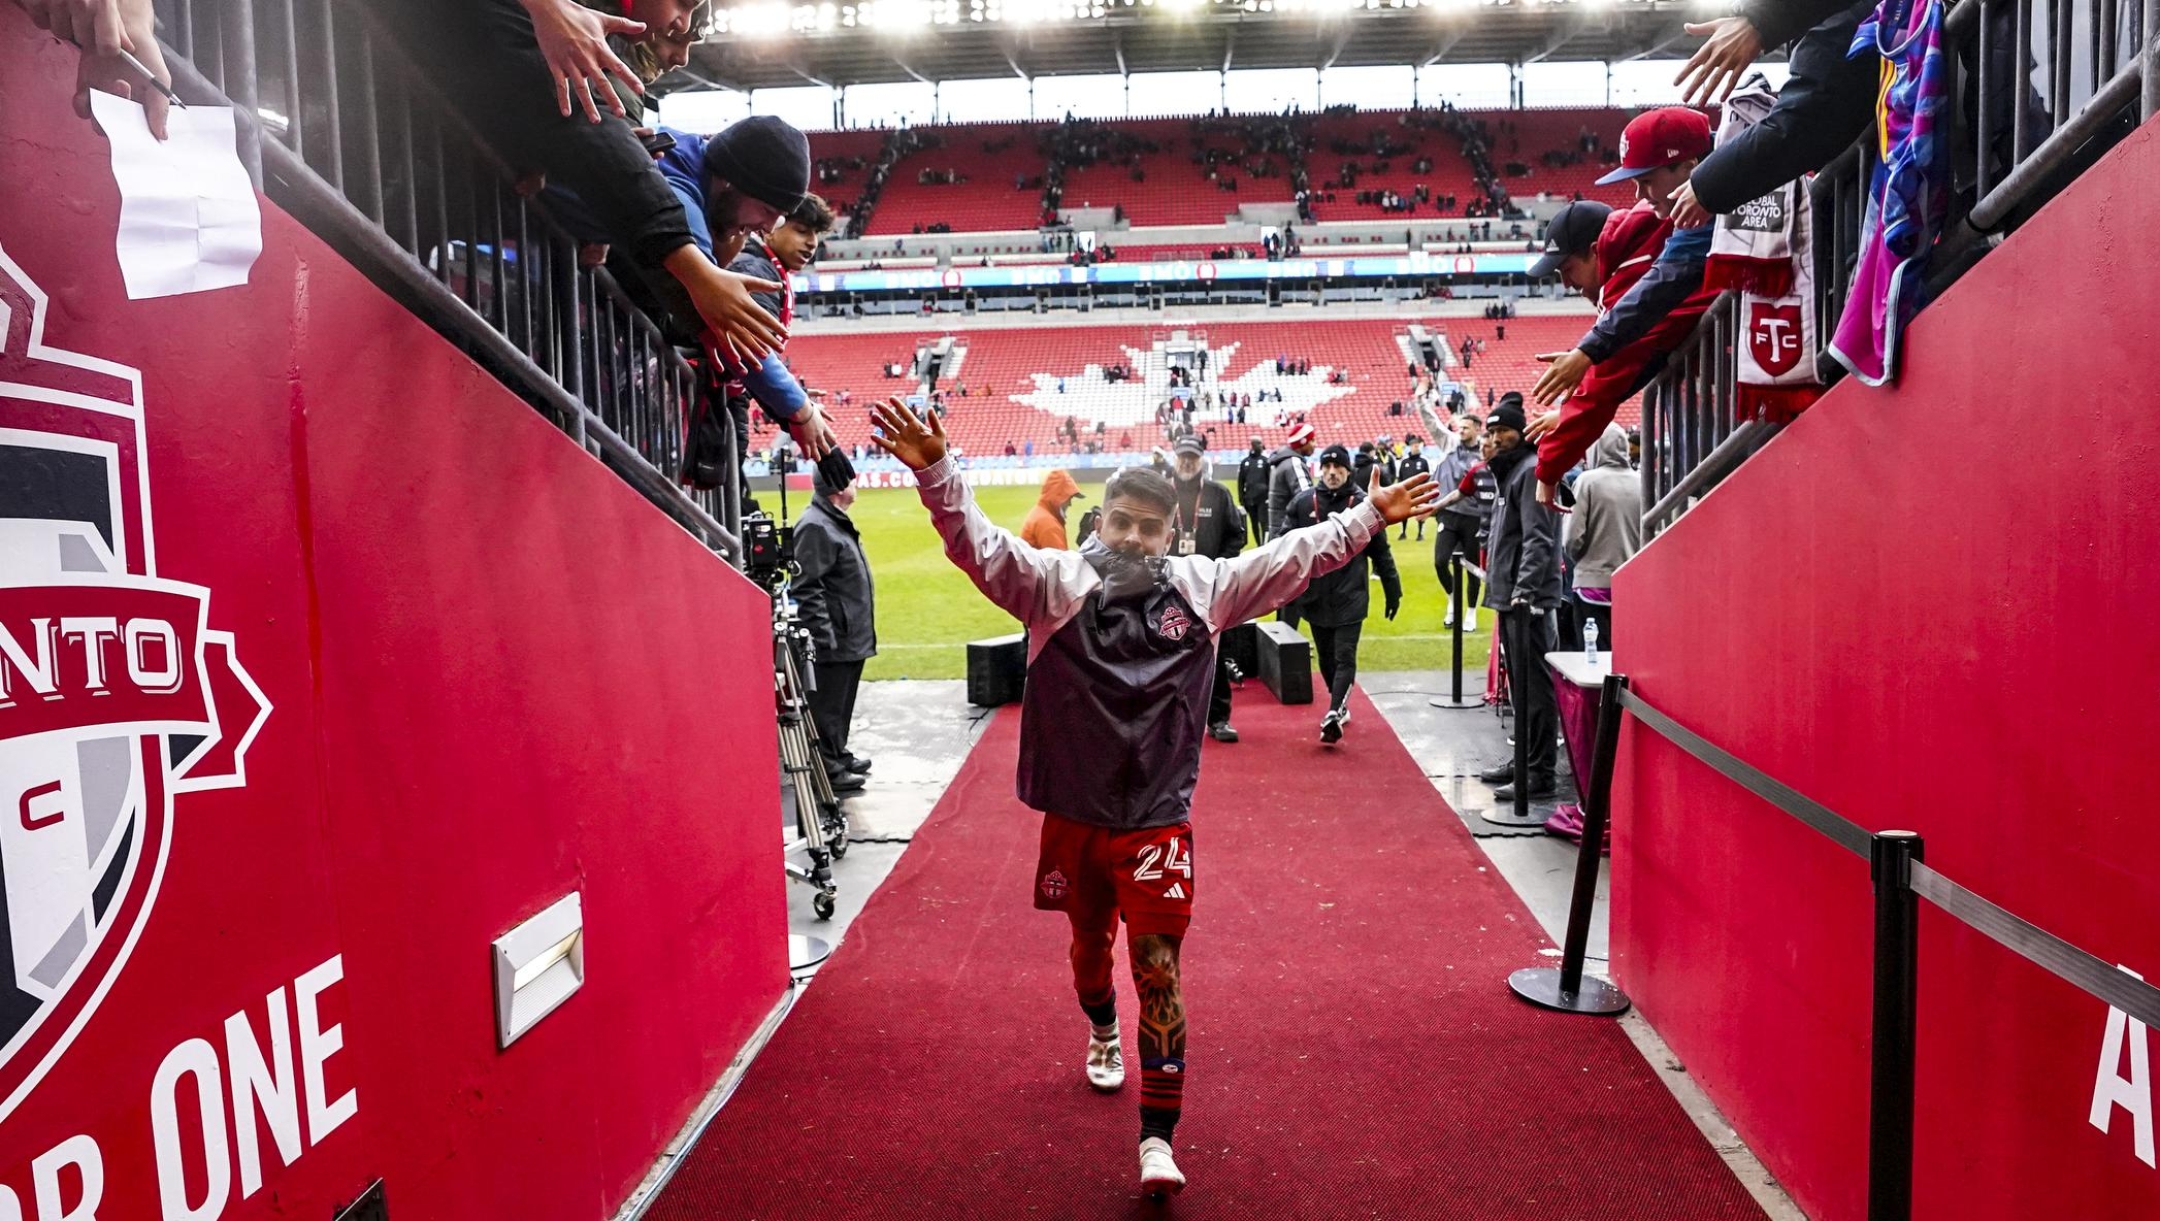 Toronto FC's Lorenzo Insigne greets fans as he returns to the locker room after scoring the game winning goal in his team's 1-0 win over Charlotte FC in an MLS soccer game in Toronto, Saturday, March 9, 2024. (Chris Young/The Canadian Press via AP)